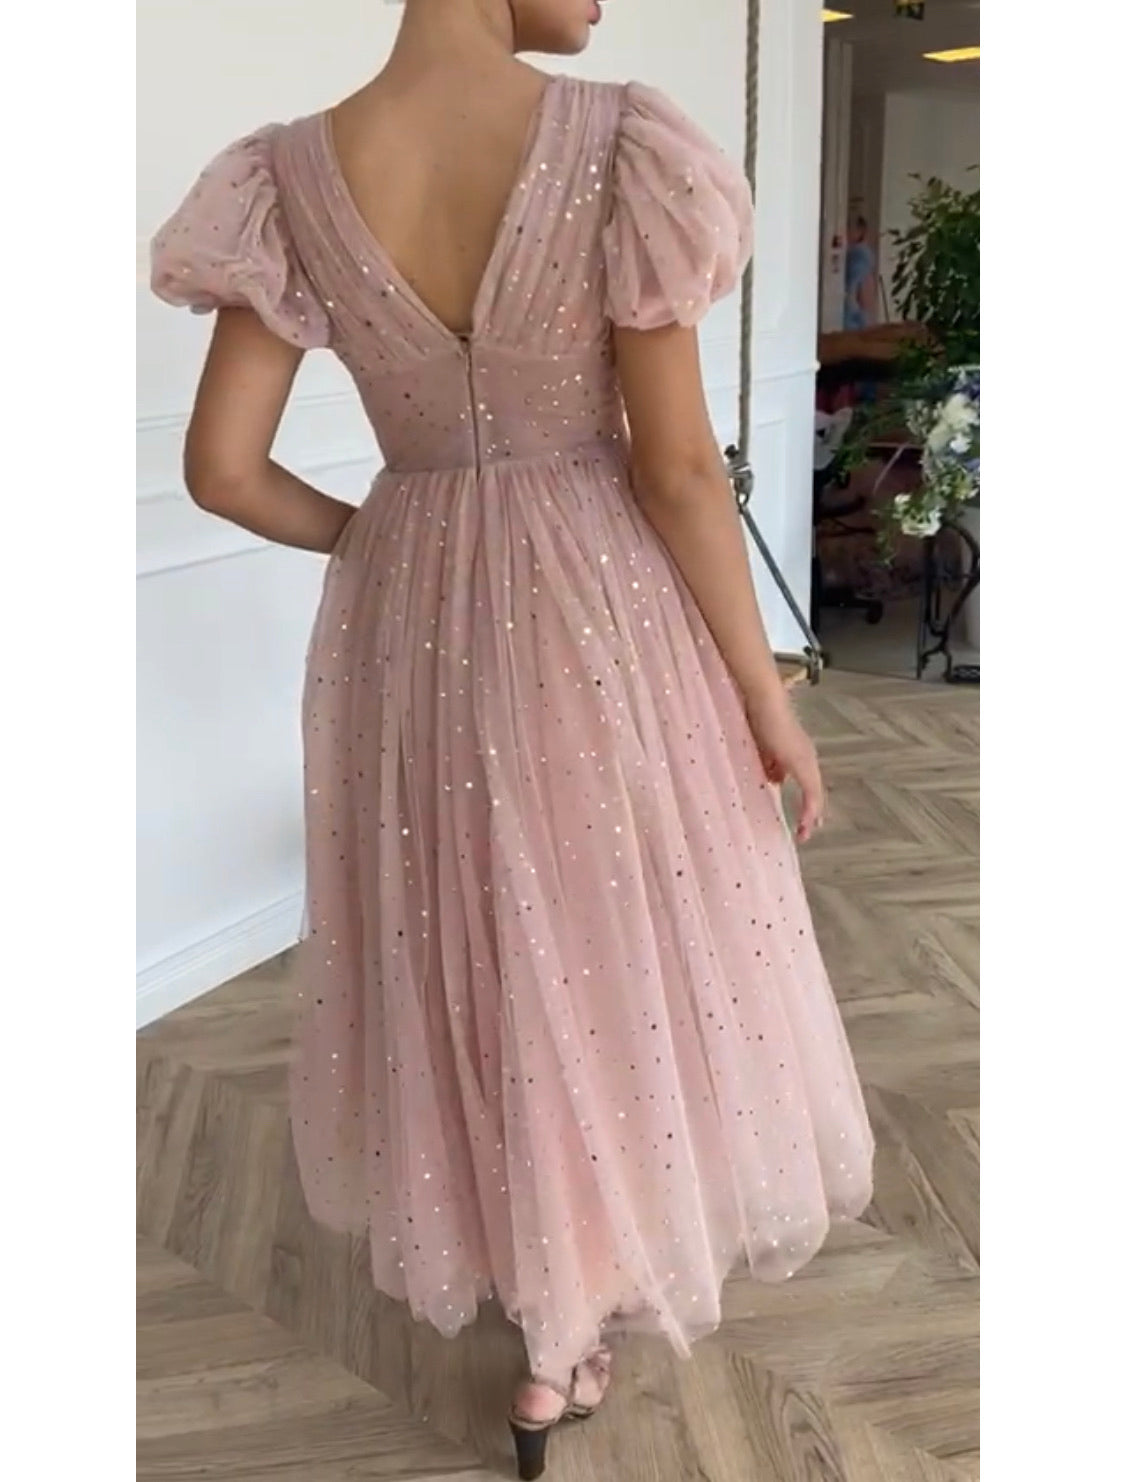 Pink midi dress with v-neck, short sleeves and starry fabric